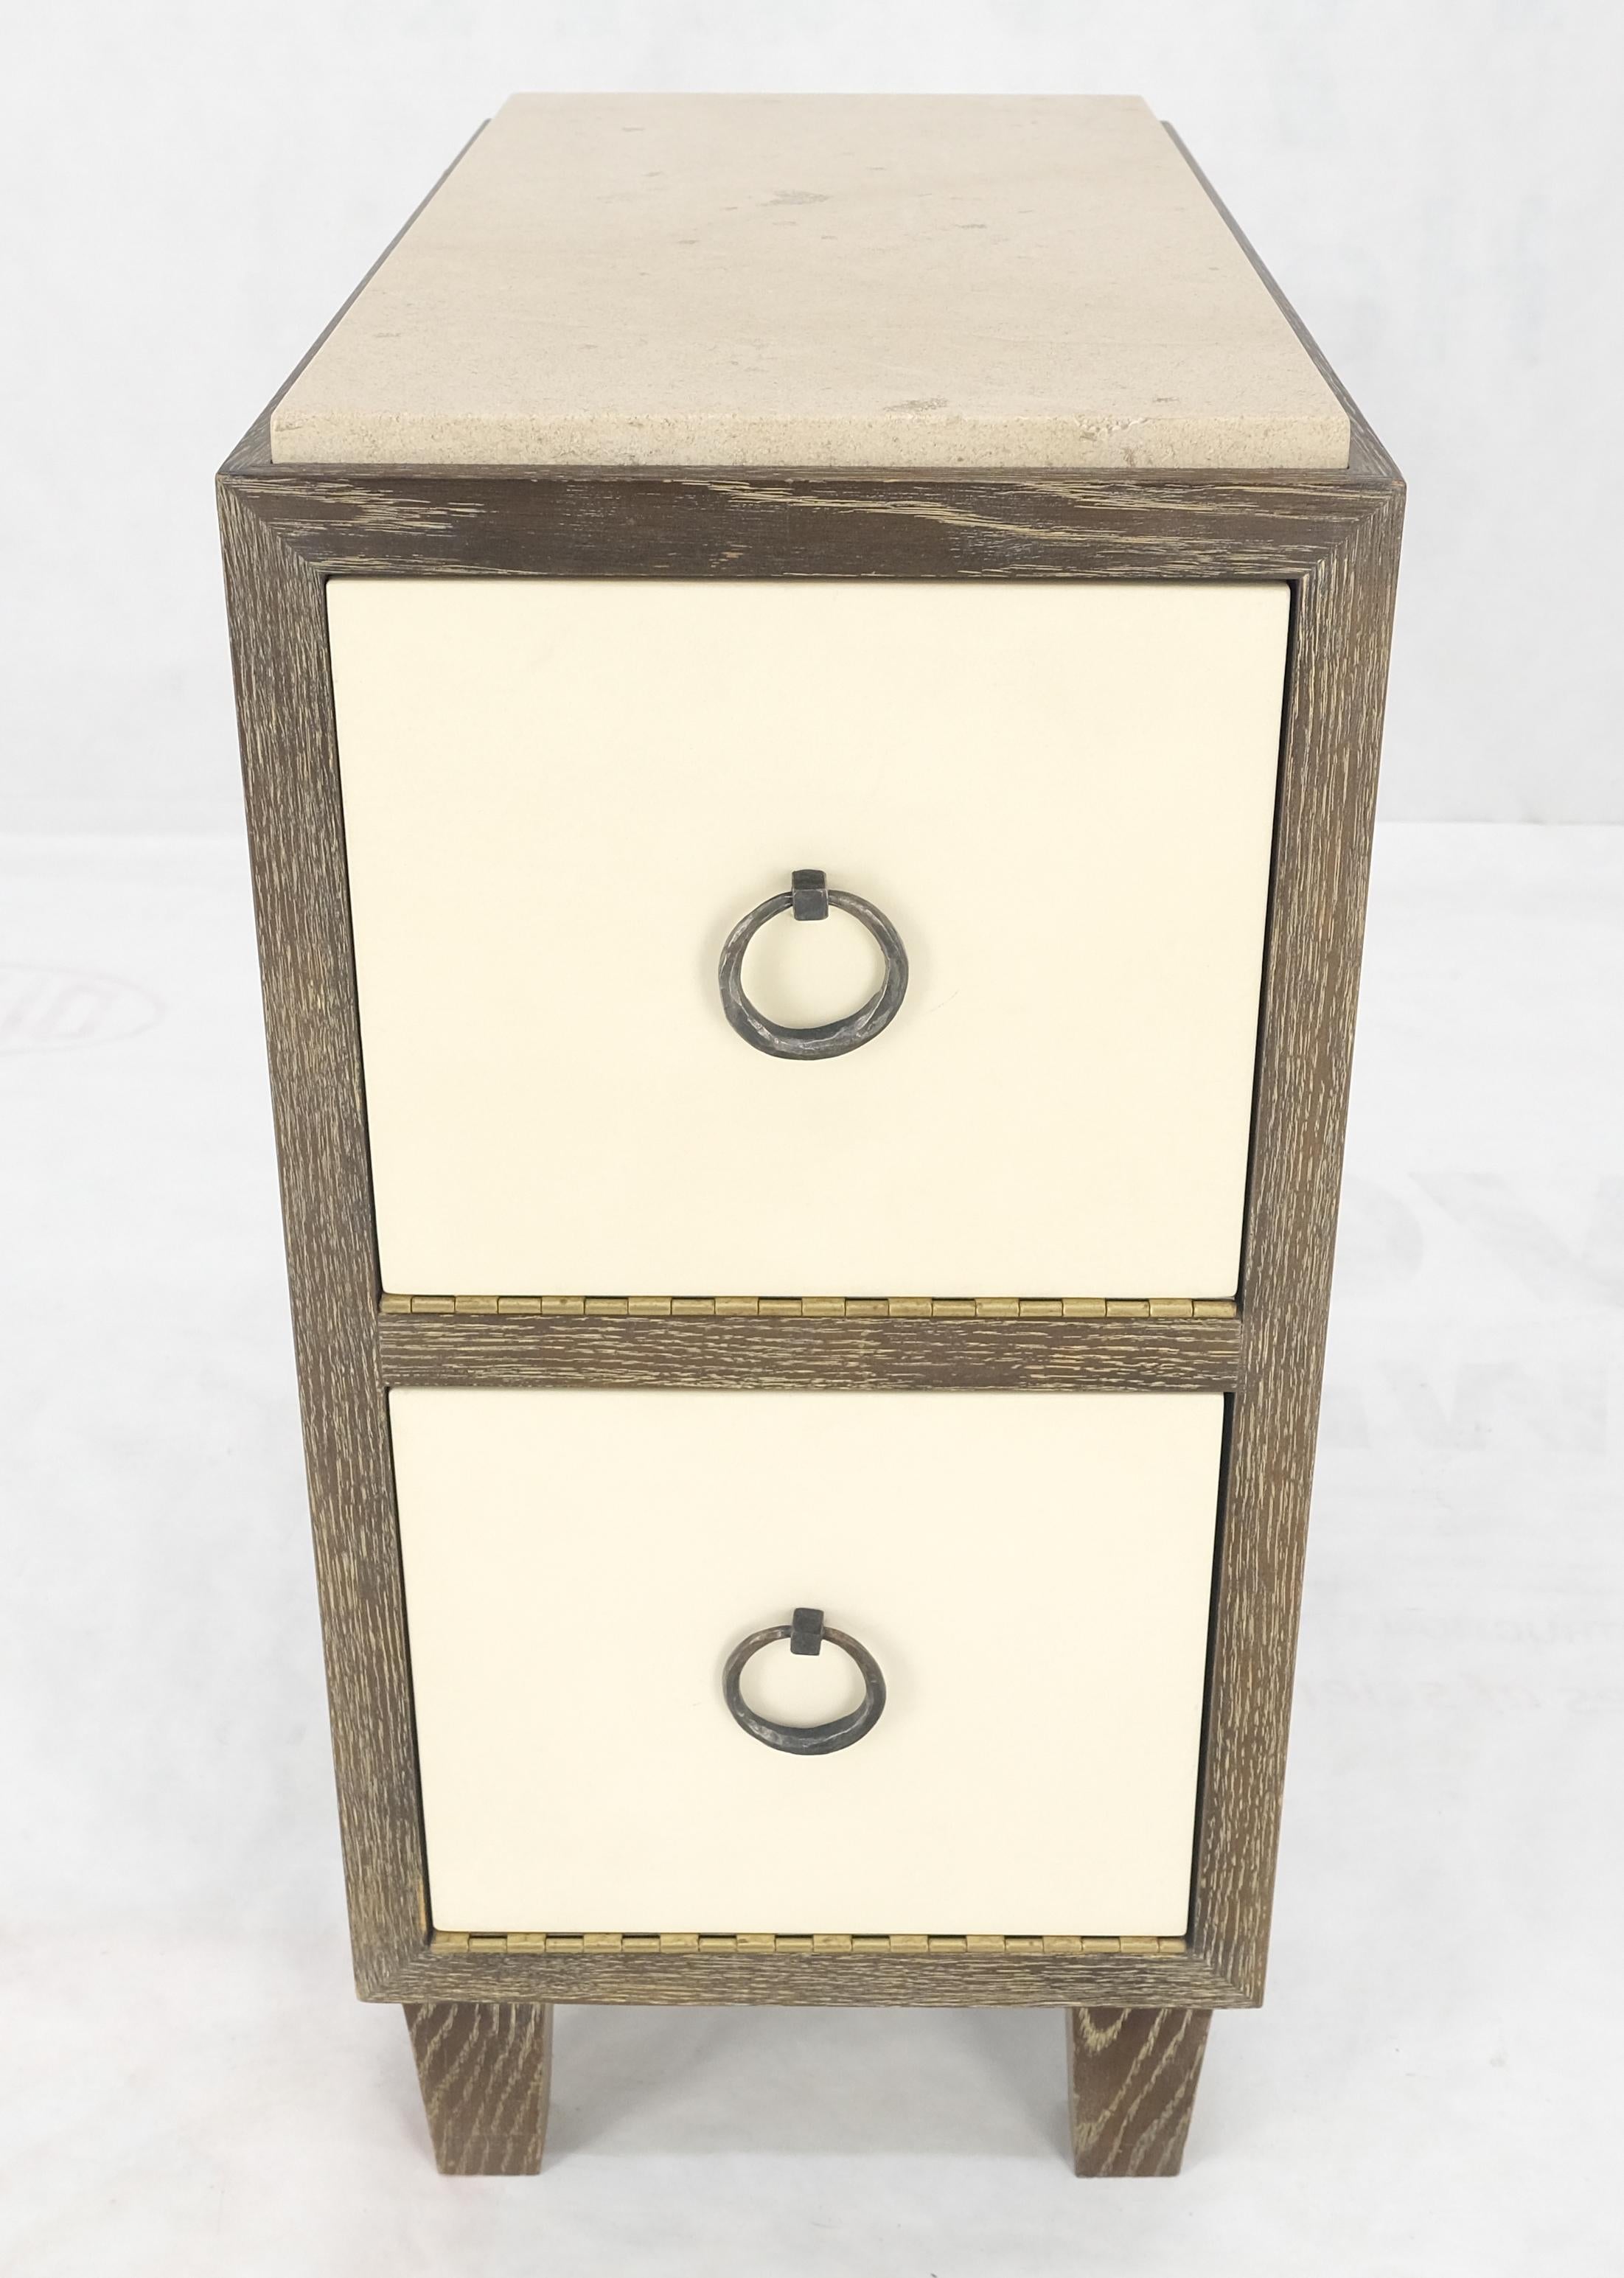 American Travertine Top Cerused Drop Front Doors Compartments Night Stand End Table MINT For Sale